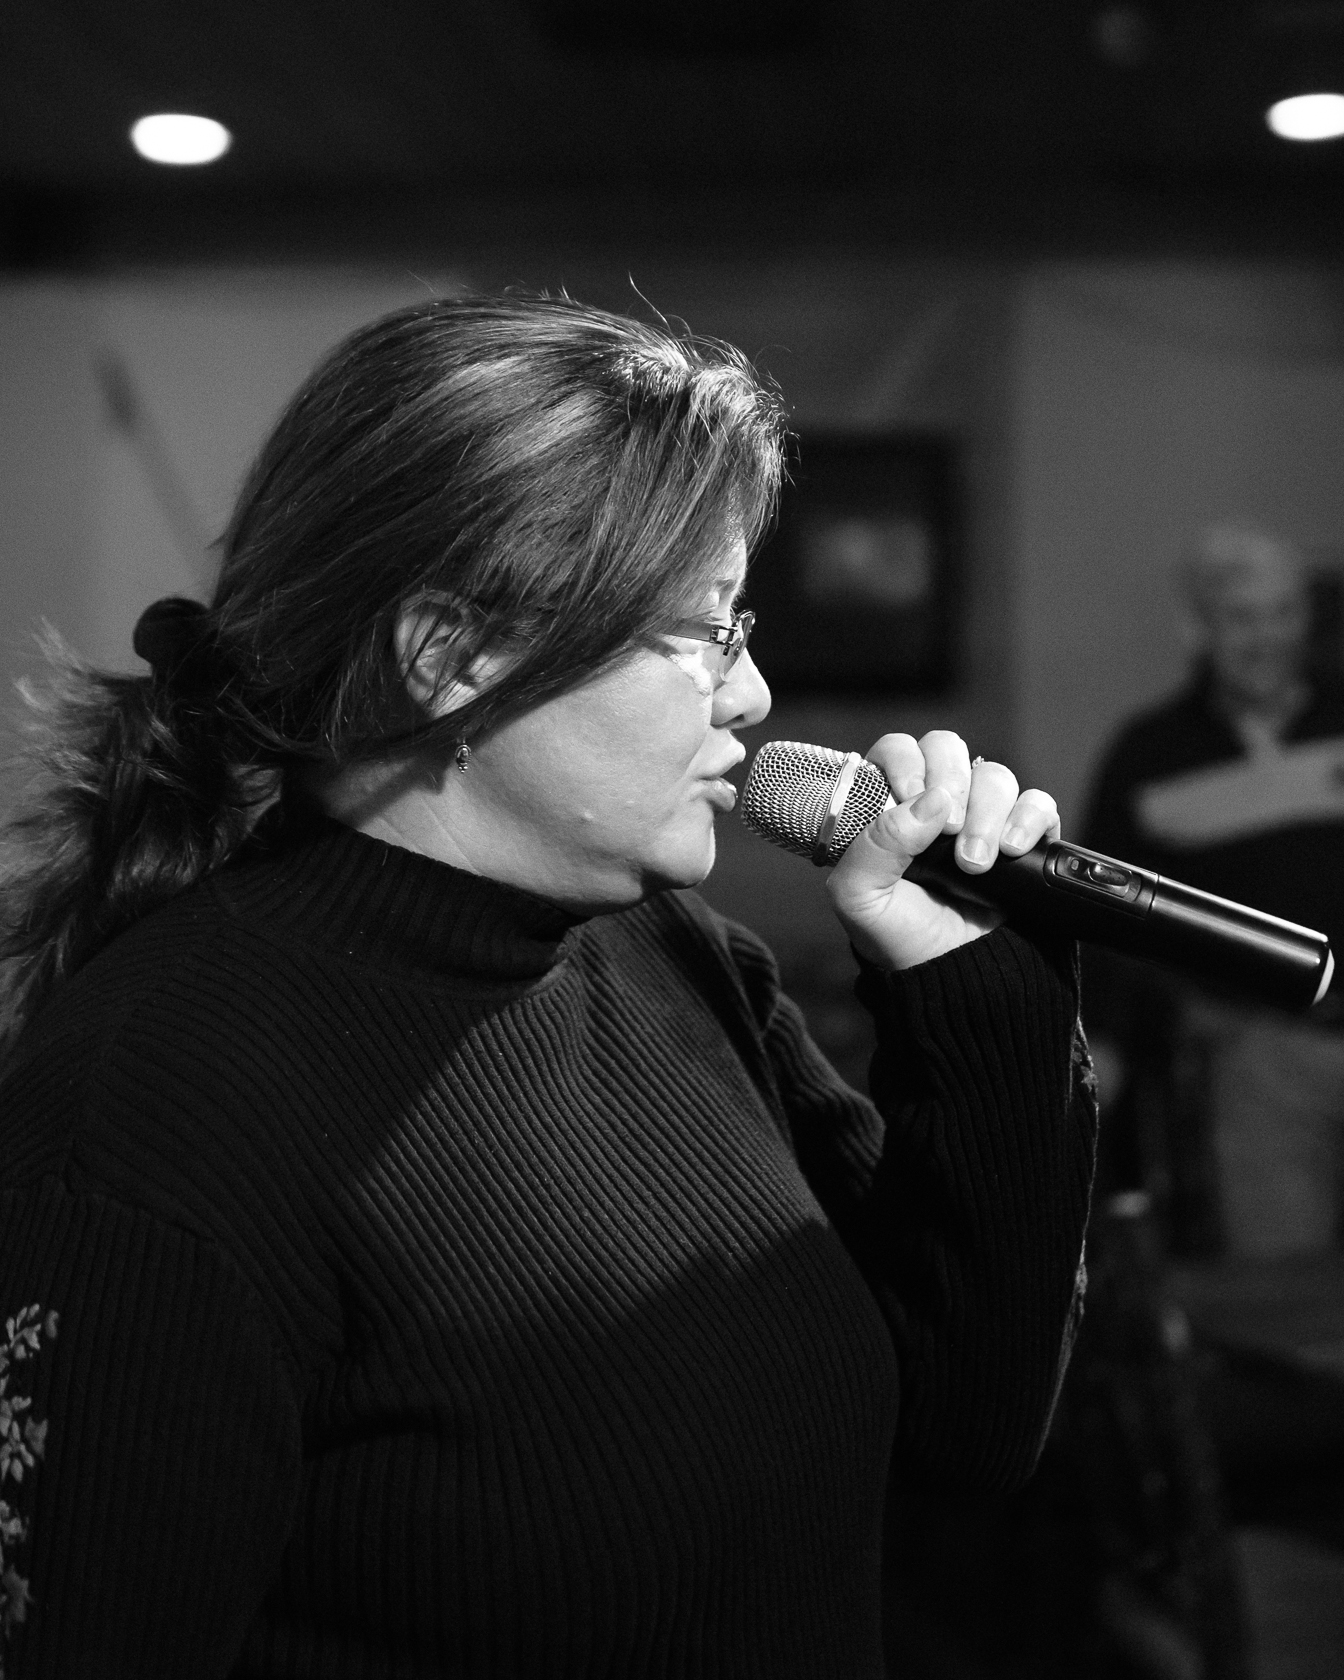 woman in glasses singing into microphone while others watch